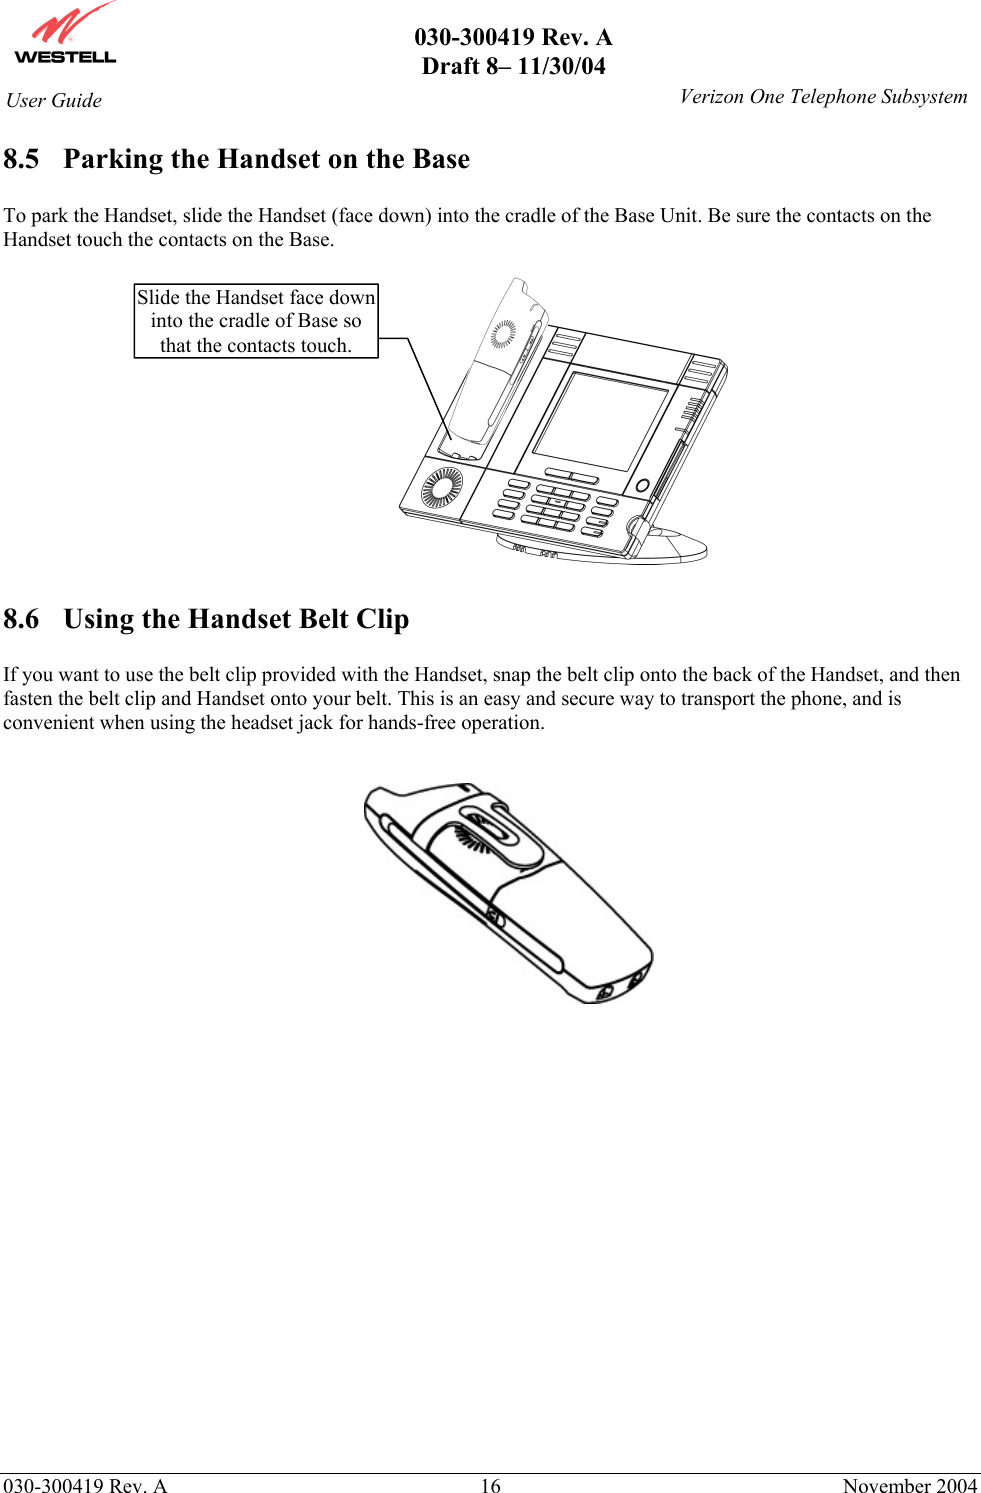       030-300419 Rev. A Draft 8– 11/30/04    030-300419 Rev. A  16  November 2004 User Guide   Verizon One Telephone Subsystem8.5  Parking the Handset on the Base  To park the Handset, slide the Handset (face down) into the cradle of the Base Unit. Be sure the contacts on the Handset touch the contacts on the Base.                                 8.6  Using the Handset Belt Clip  If you want to use the belt clip provided with the Handset, snap the belt clip onto the back of the Handset, and then fasten the belt clip and Handset onto your belt. This is an easy and secure way to transport the phone, and is convenient when using the headset jack for hands-free operation.    Slide the Handset face down into the cradle of Base so that the contacts touch. 